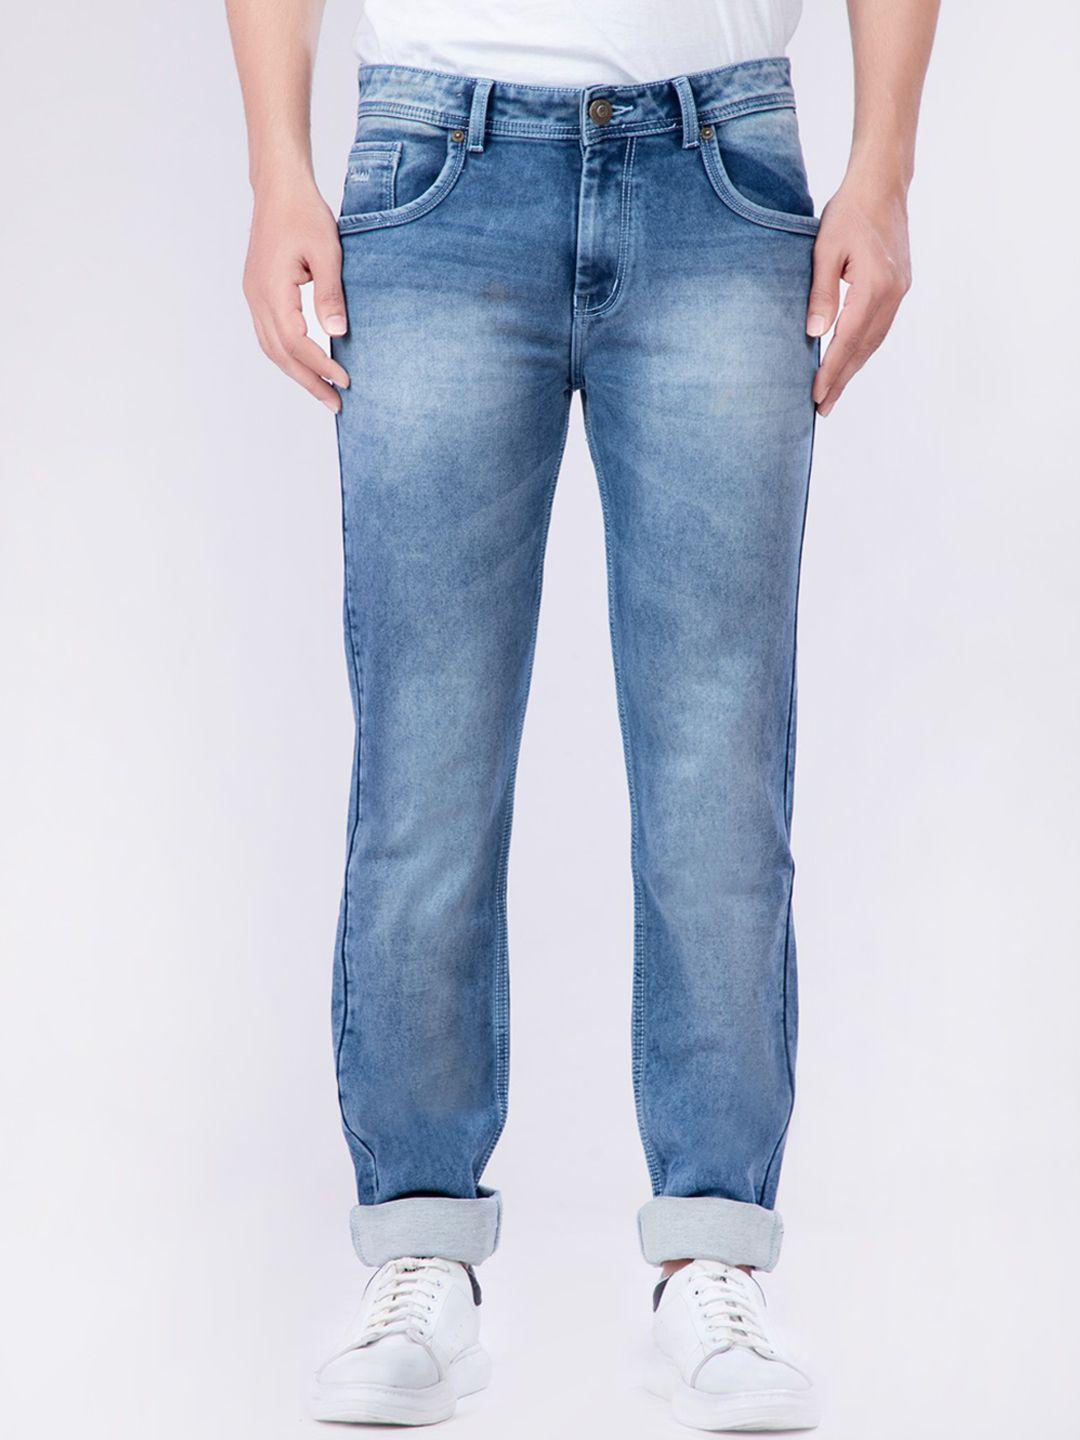 hj hasasi men blue heavy fade stretchable jeans